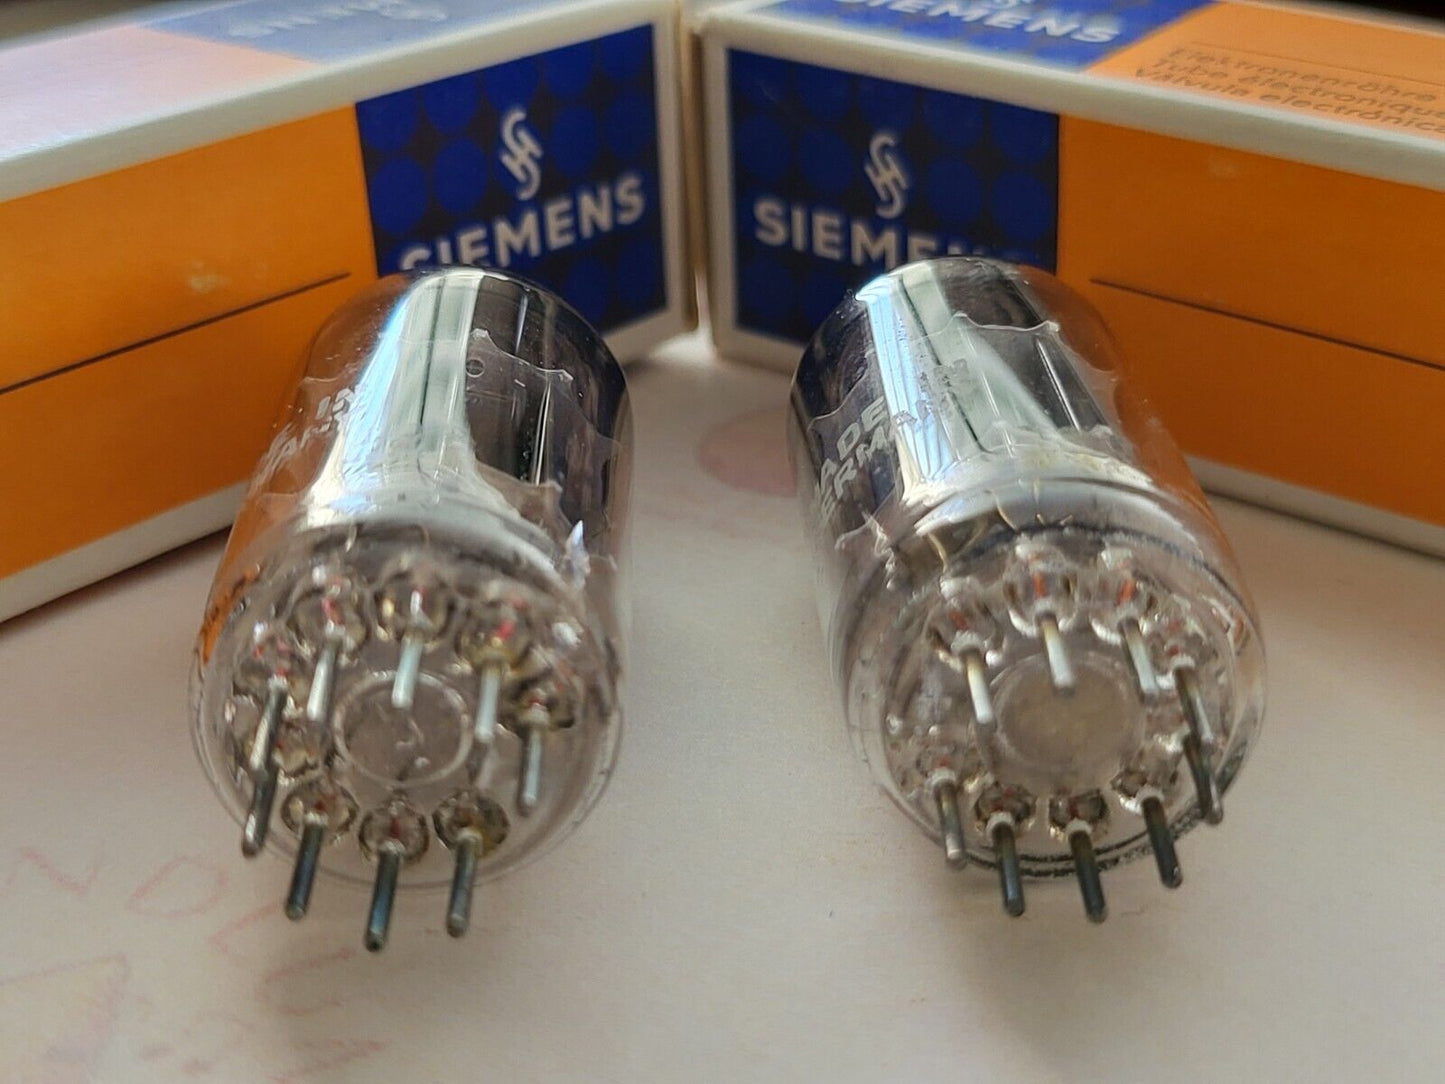 Siemens ECC83 12AX7 Short Plates Matched Pair in Orig. Boxes - I62 ‡4G/‡4K - NOS